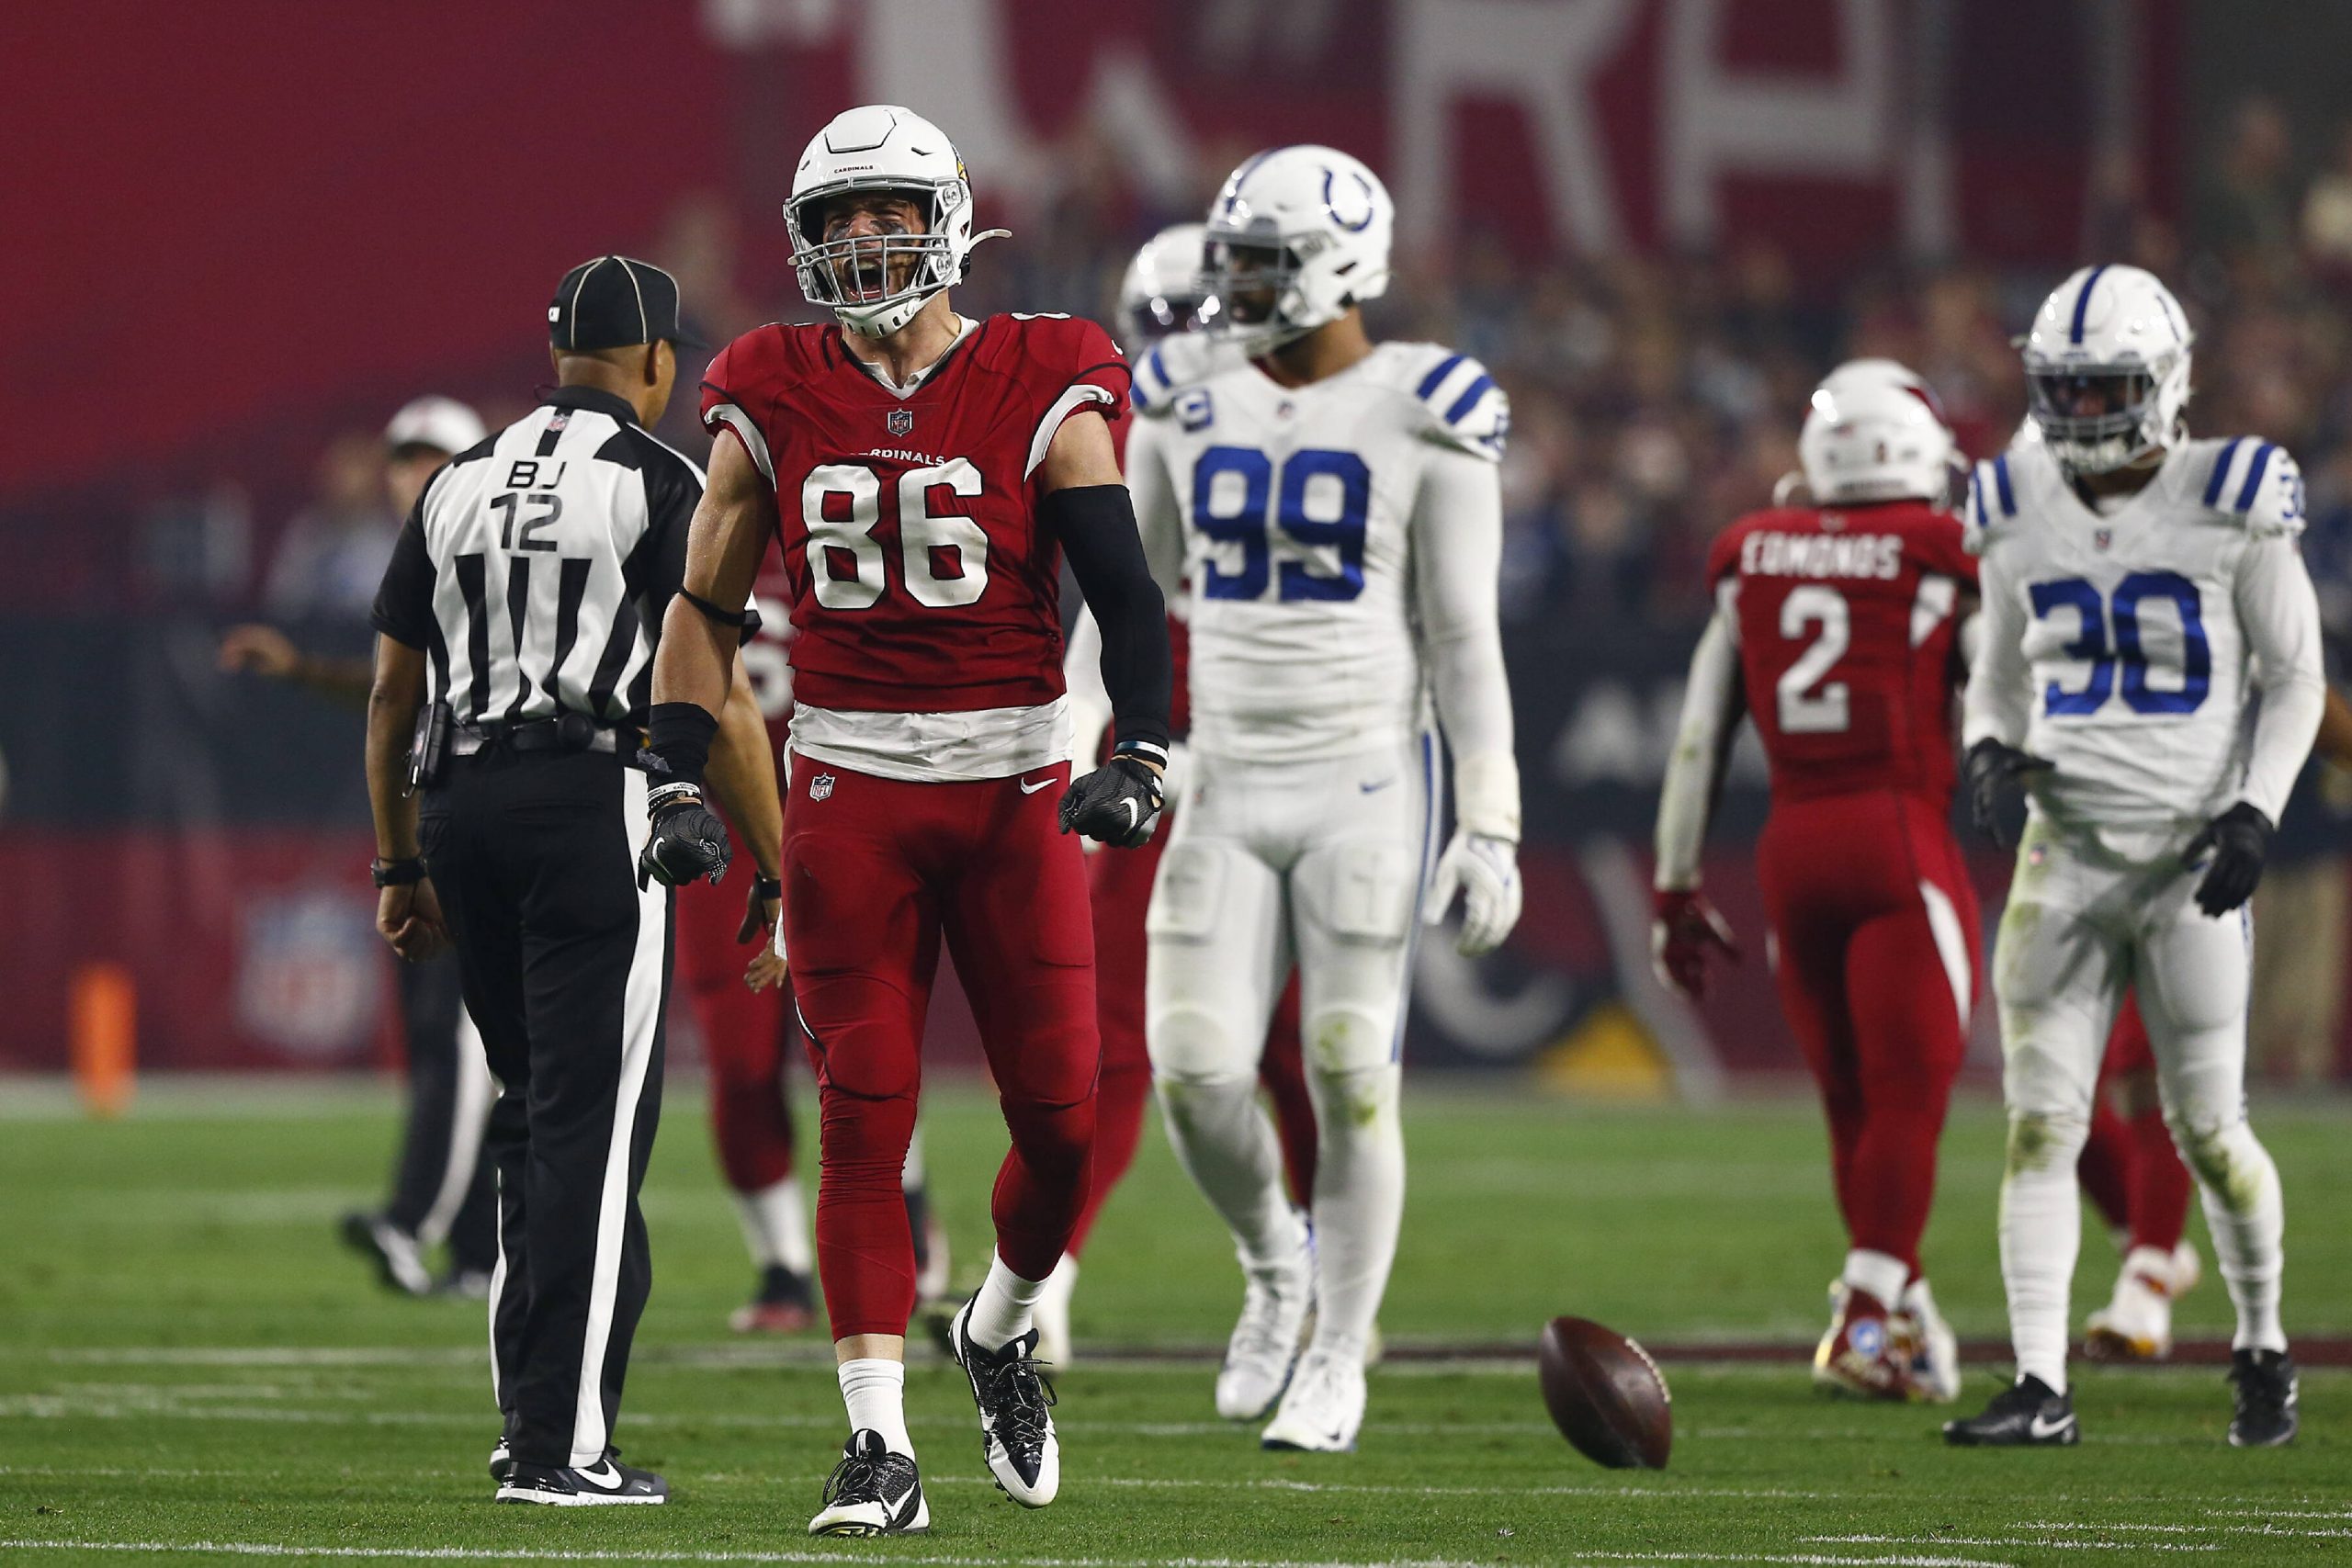 GLENDALE, AZ - DECEMBER 25:Arizona Cardinals Tight End Zach Ertz 86 reacts after getting a first down during an NFL, American Football Herren, USA game between the Indianapolis Colts and the Arizona Cardinals on December 25, 2021 at State Farm Stadium, in Glendale AZ. Photo by Jeffrey Brown/Icon Sportswire NFL: DEC 25 Colts at Cardinals Icon12252021006